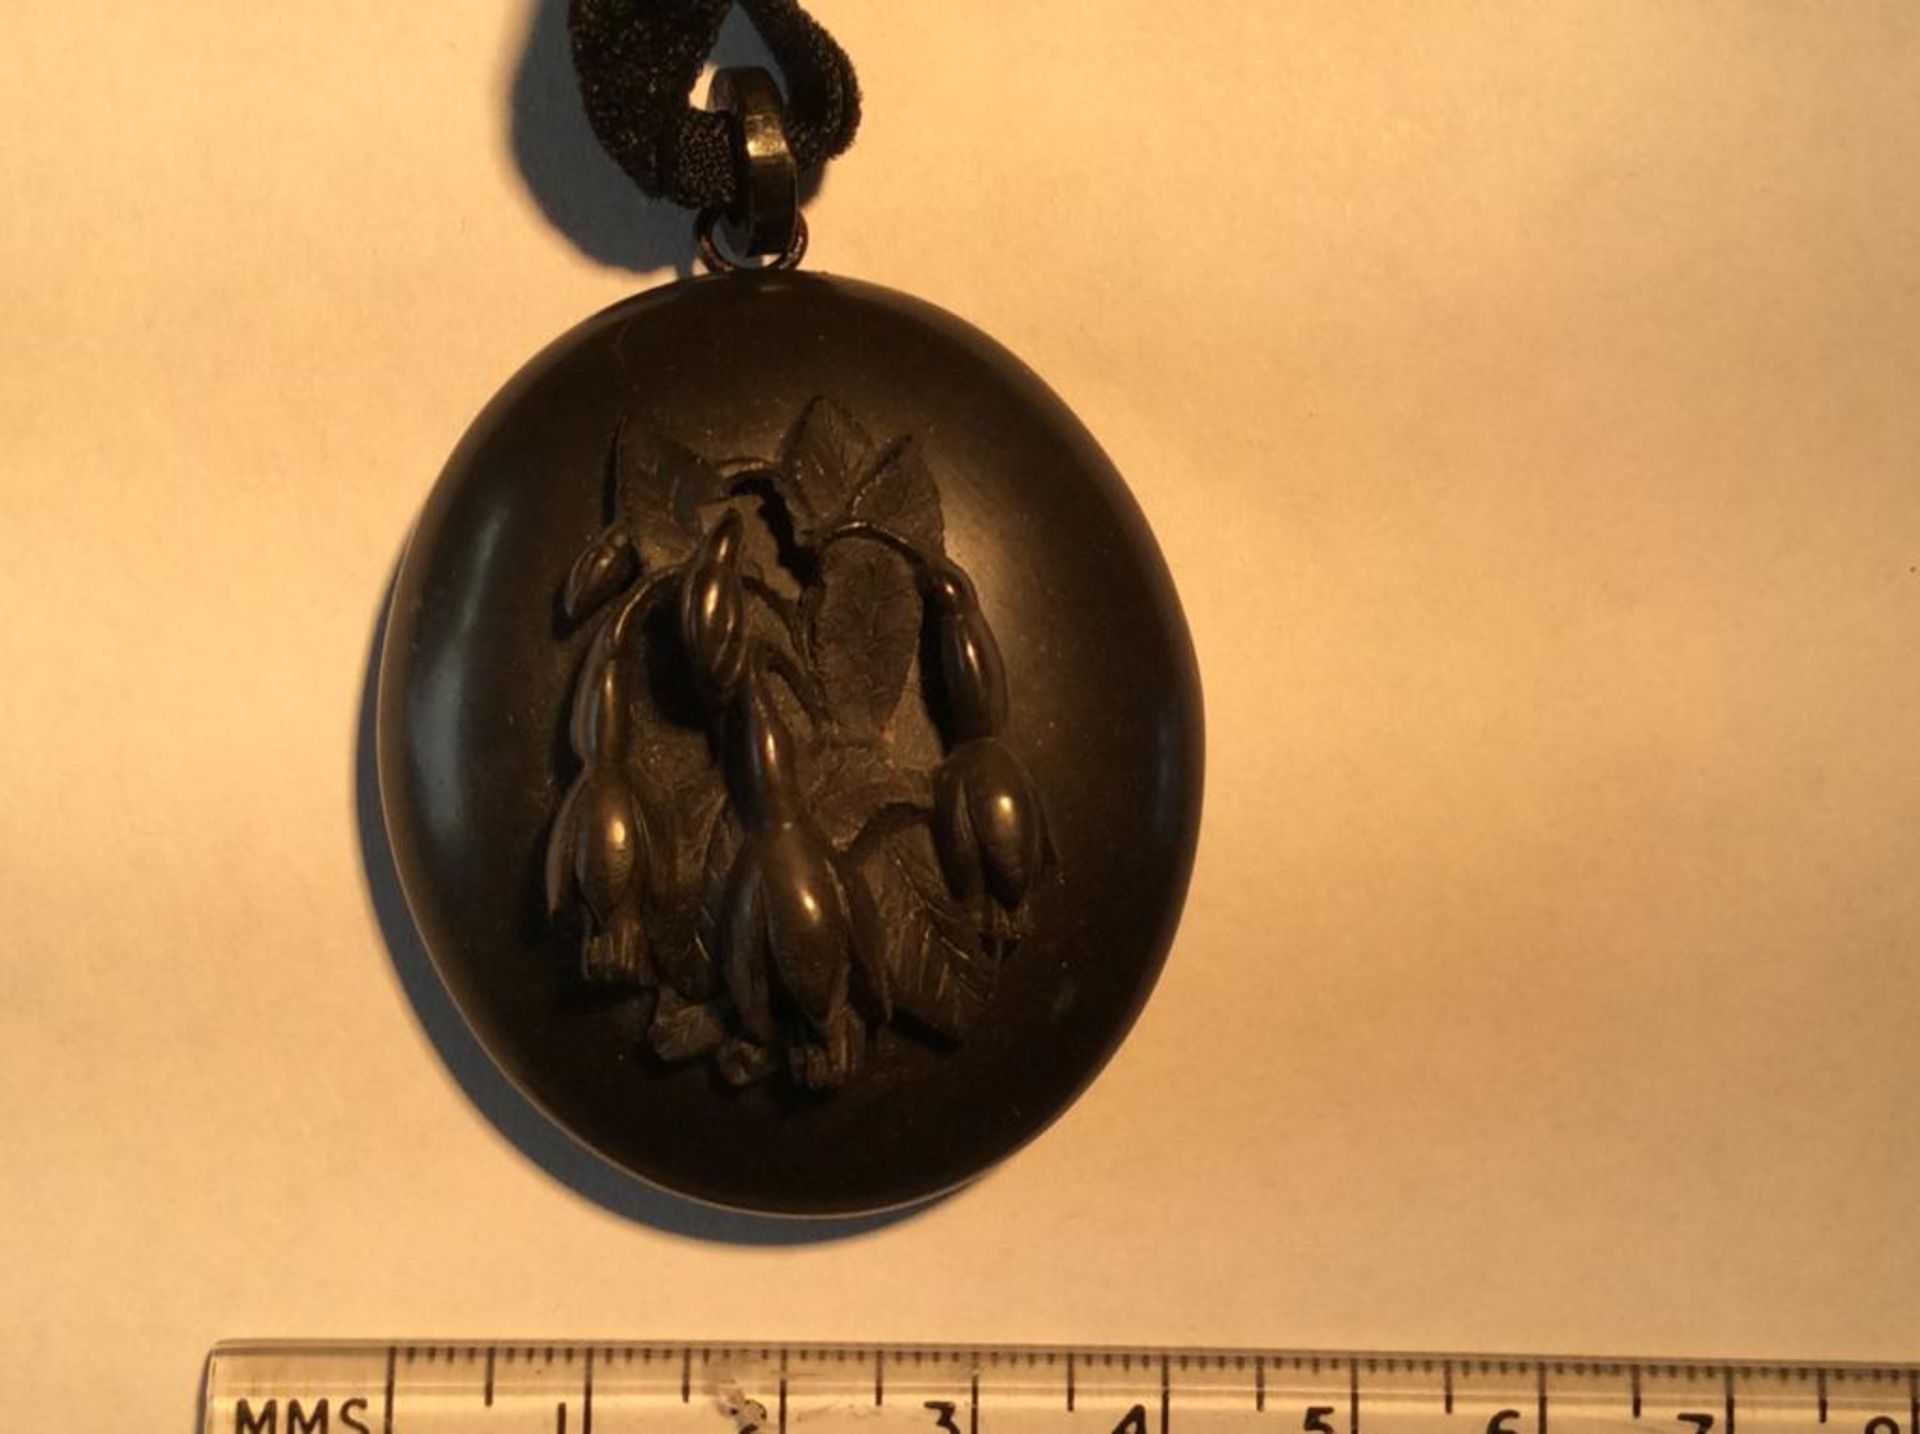 LARGE WELL CARVED VICTORIAN LOCKET